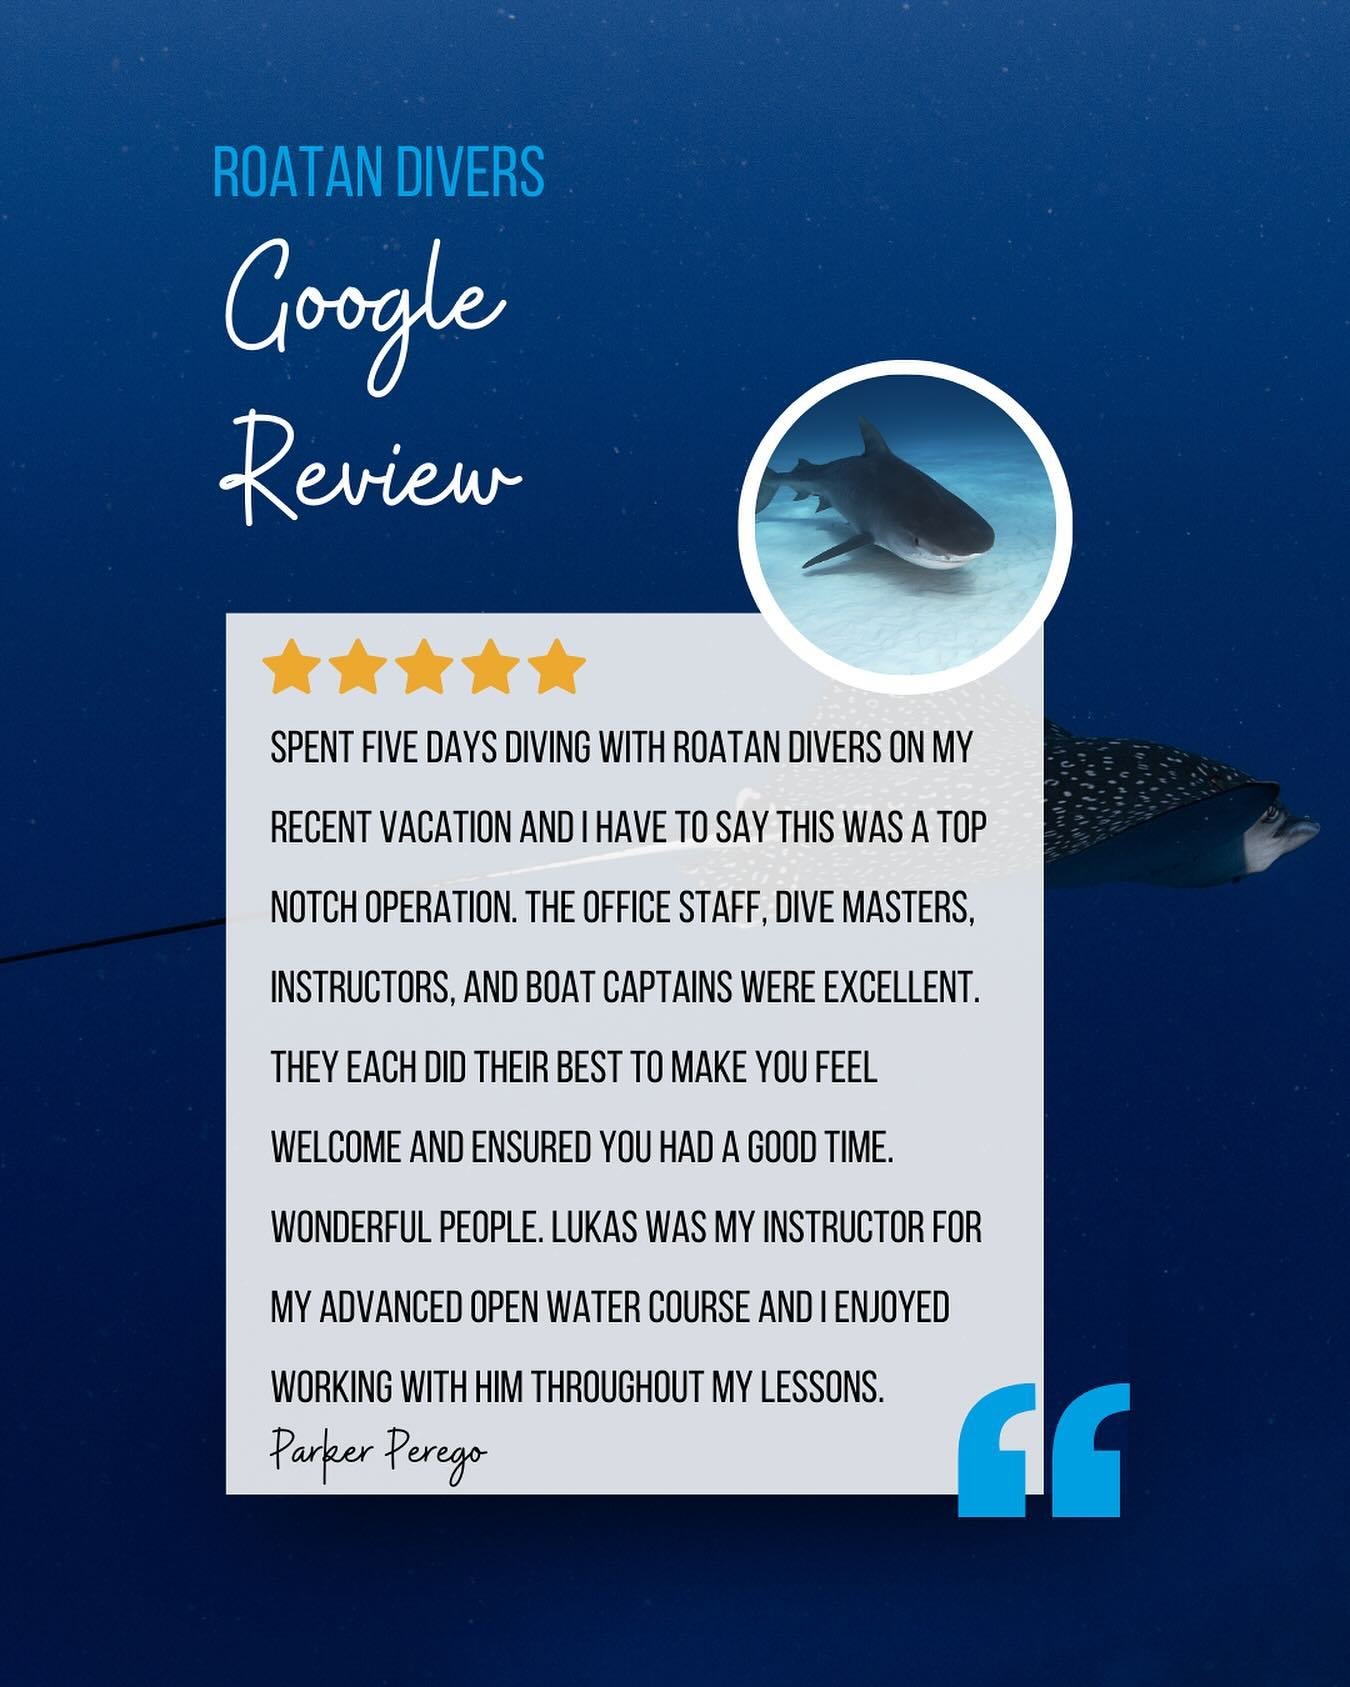 Parker, it was such a pleasure to have you diving with us! We would love to have you back any time!

Want to read more about what people have been saying about us? You can find our Google and TripAdvisor reviews at the link in our bio!
&zwnj;

#padic